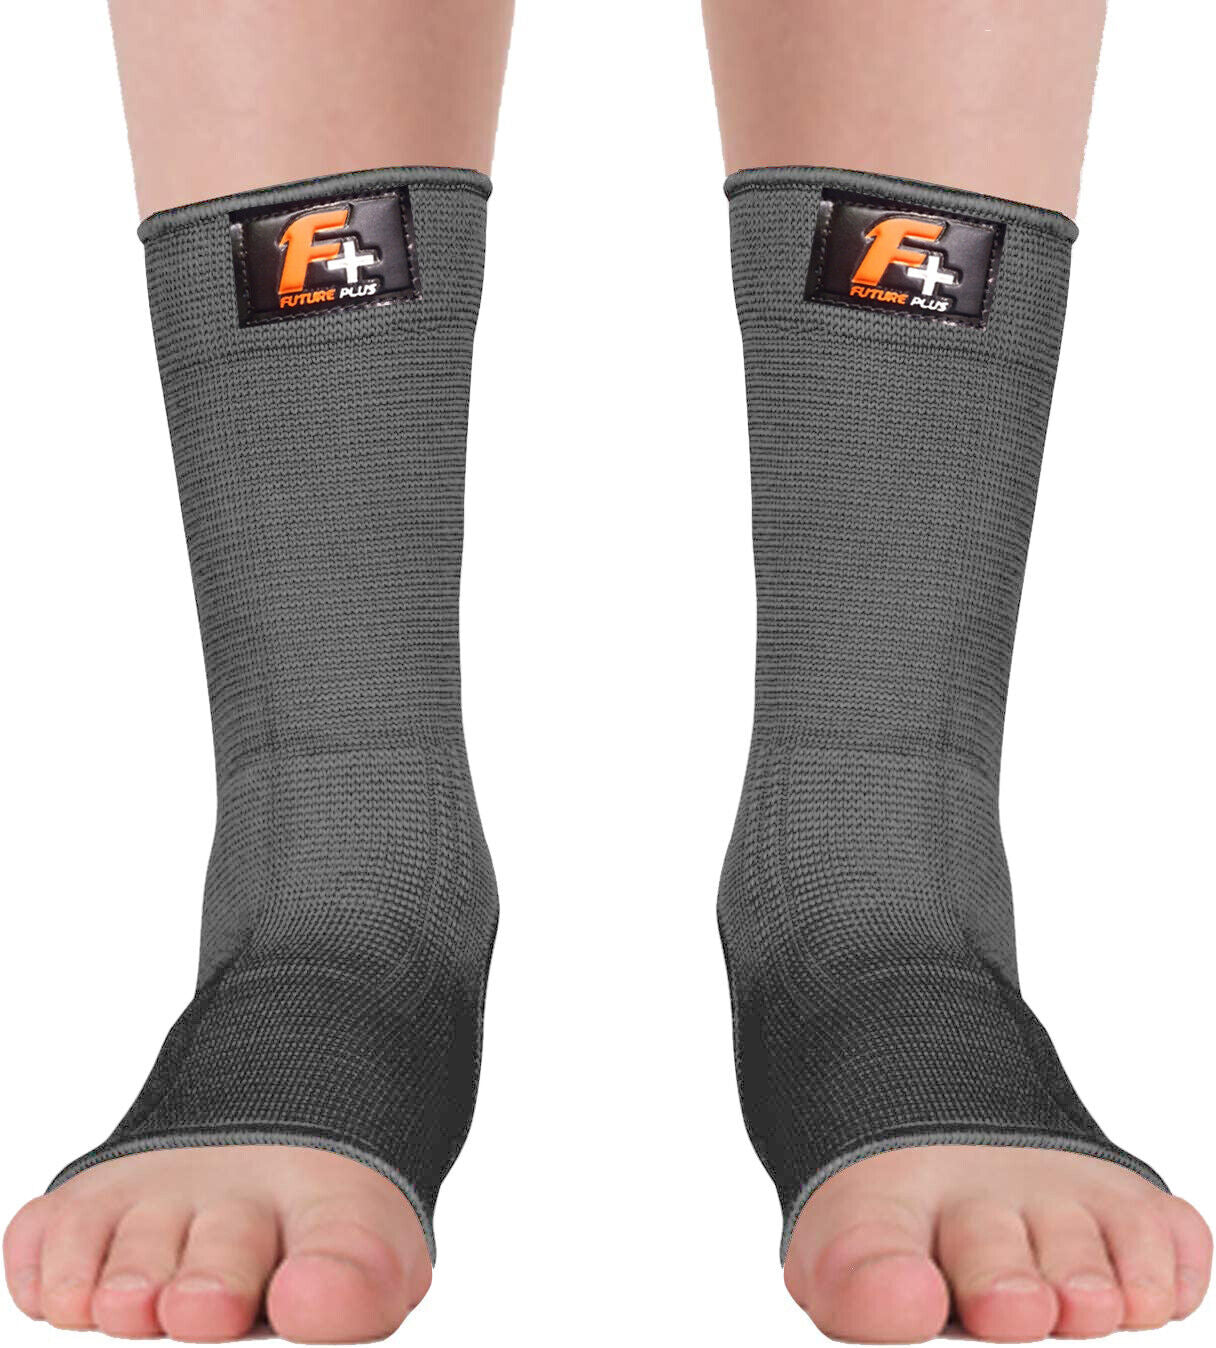 Best Socks for Plantar Fasciitis UK - 2x Compression Socks Fit Foot Arch Pain Relief Support Pair